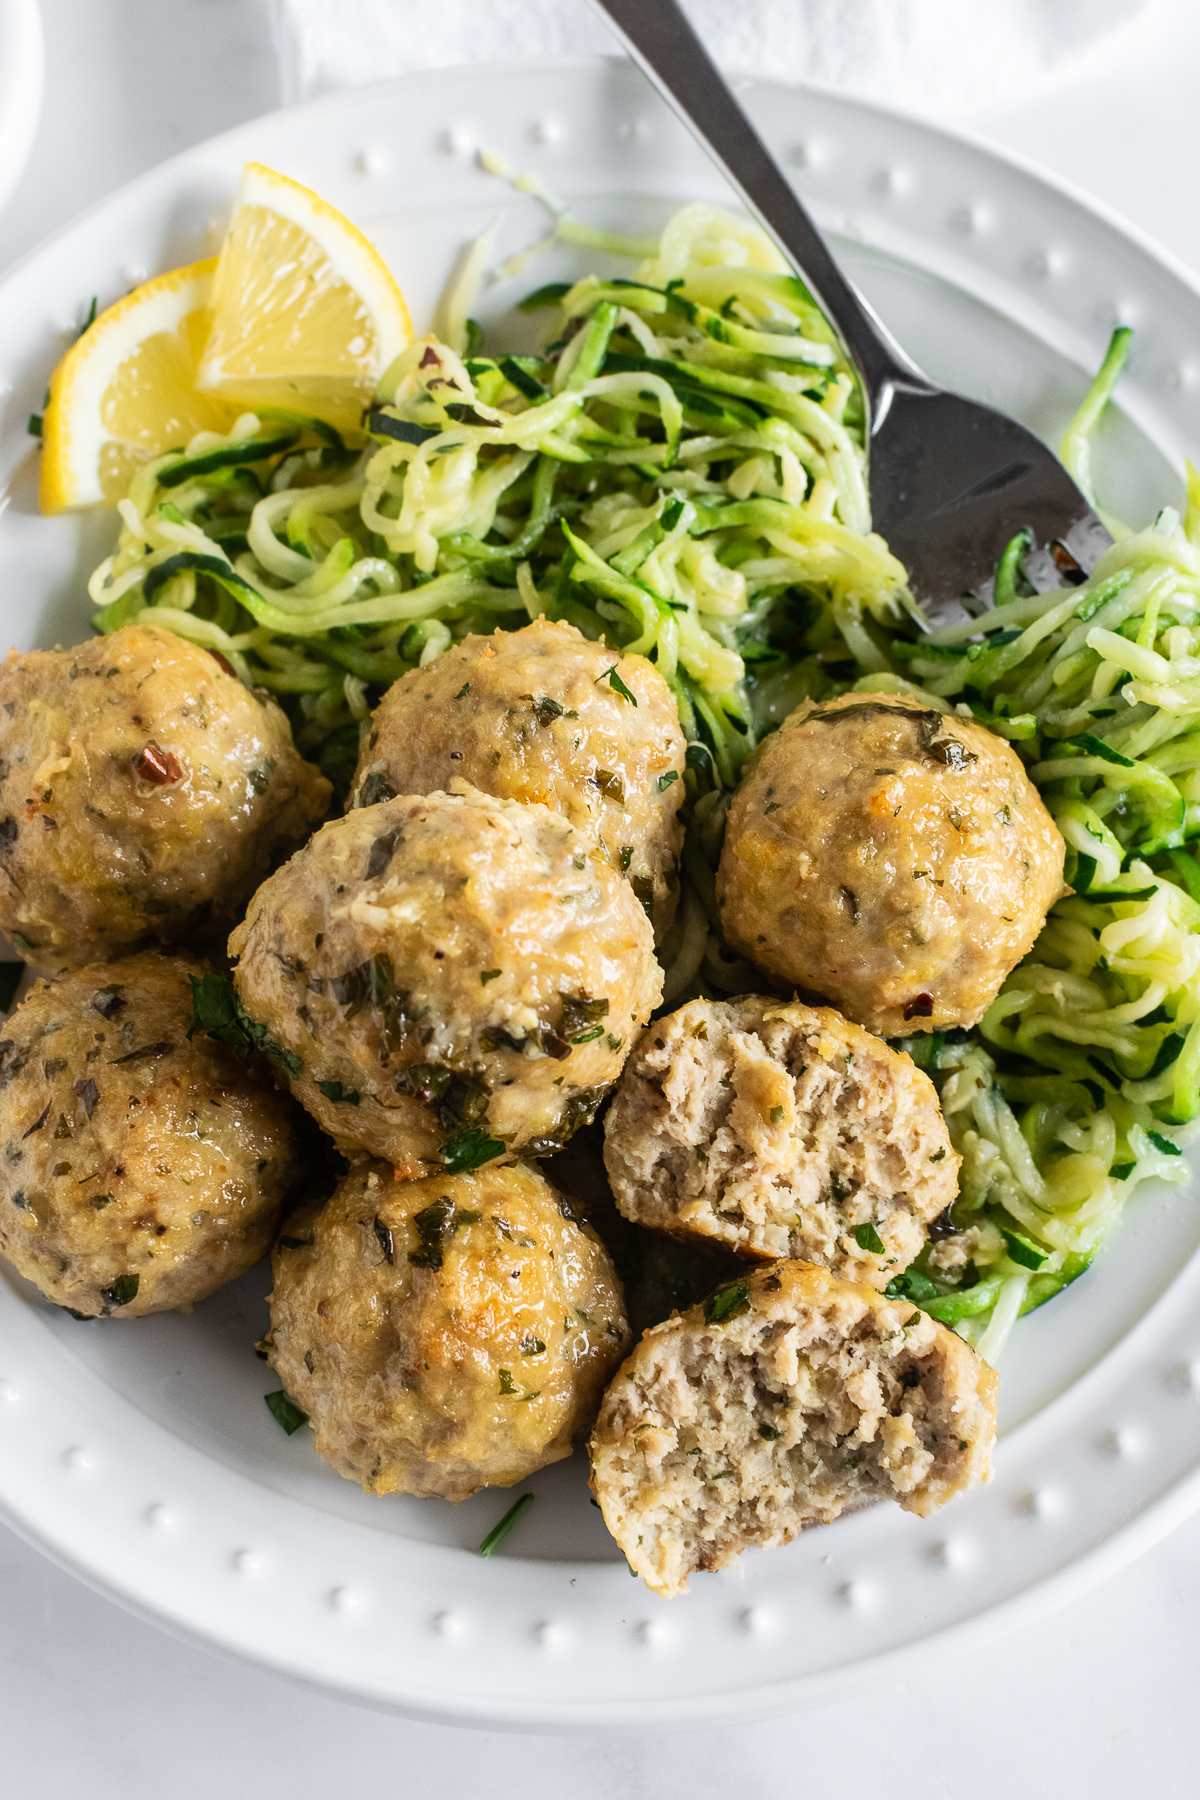 baked chicken meatballs with lemon garlic herb sauce on plate